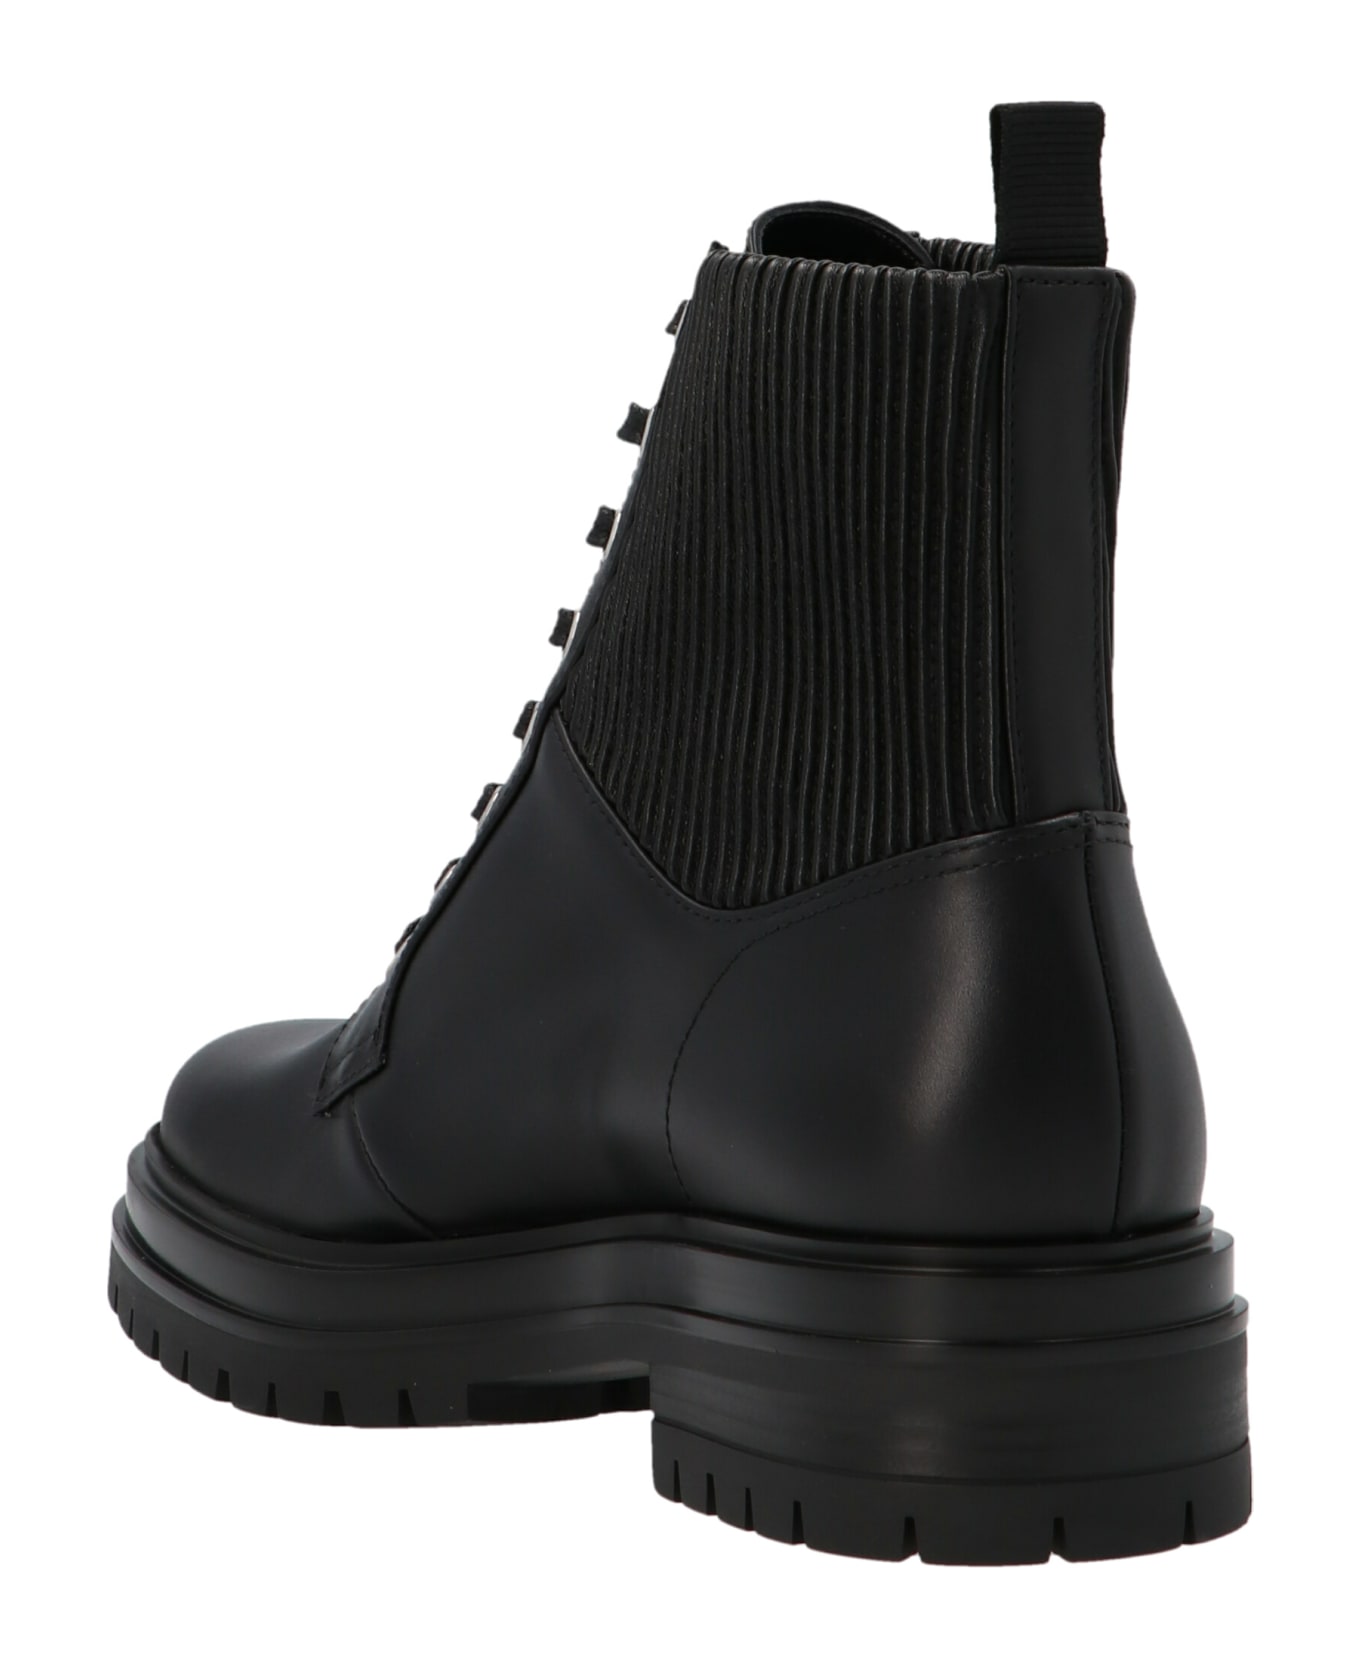 Gianvito Rossi 'martis' Combat Boots - Kiths Spring 1 21 collection includes one of todays most popular shoe trends